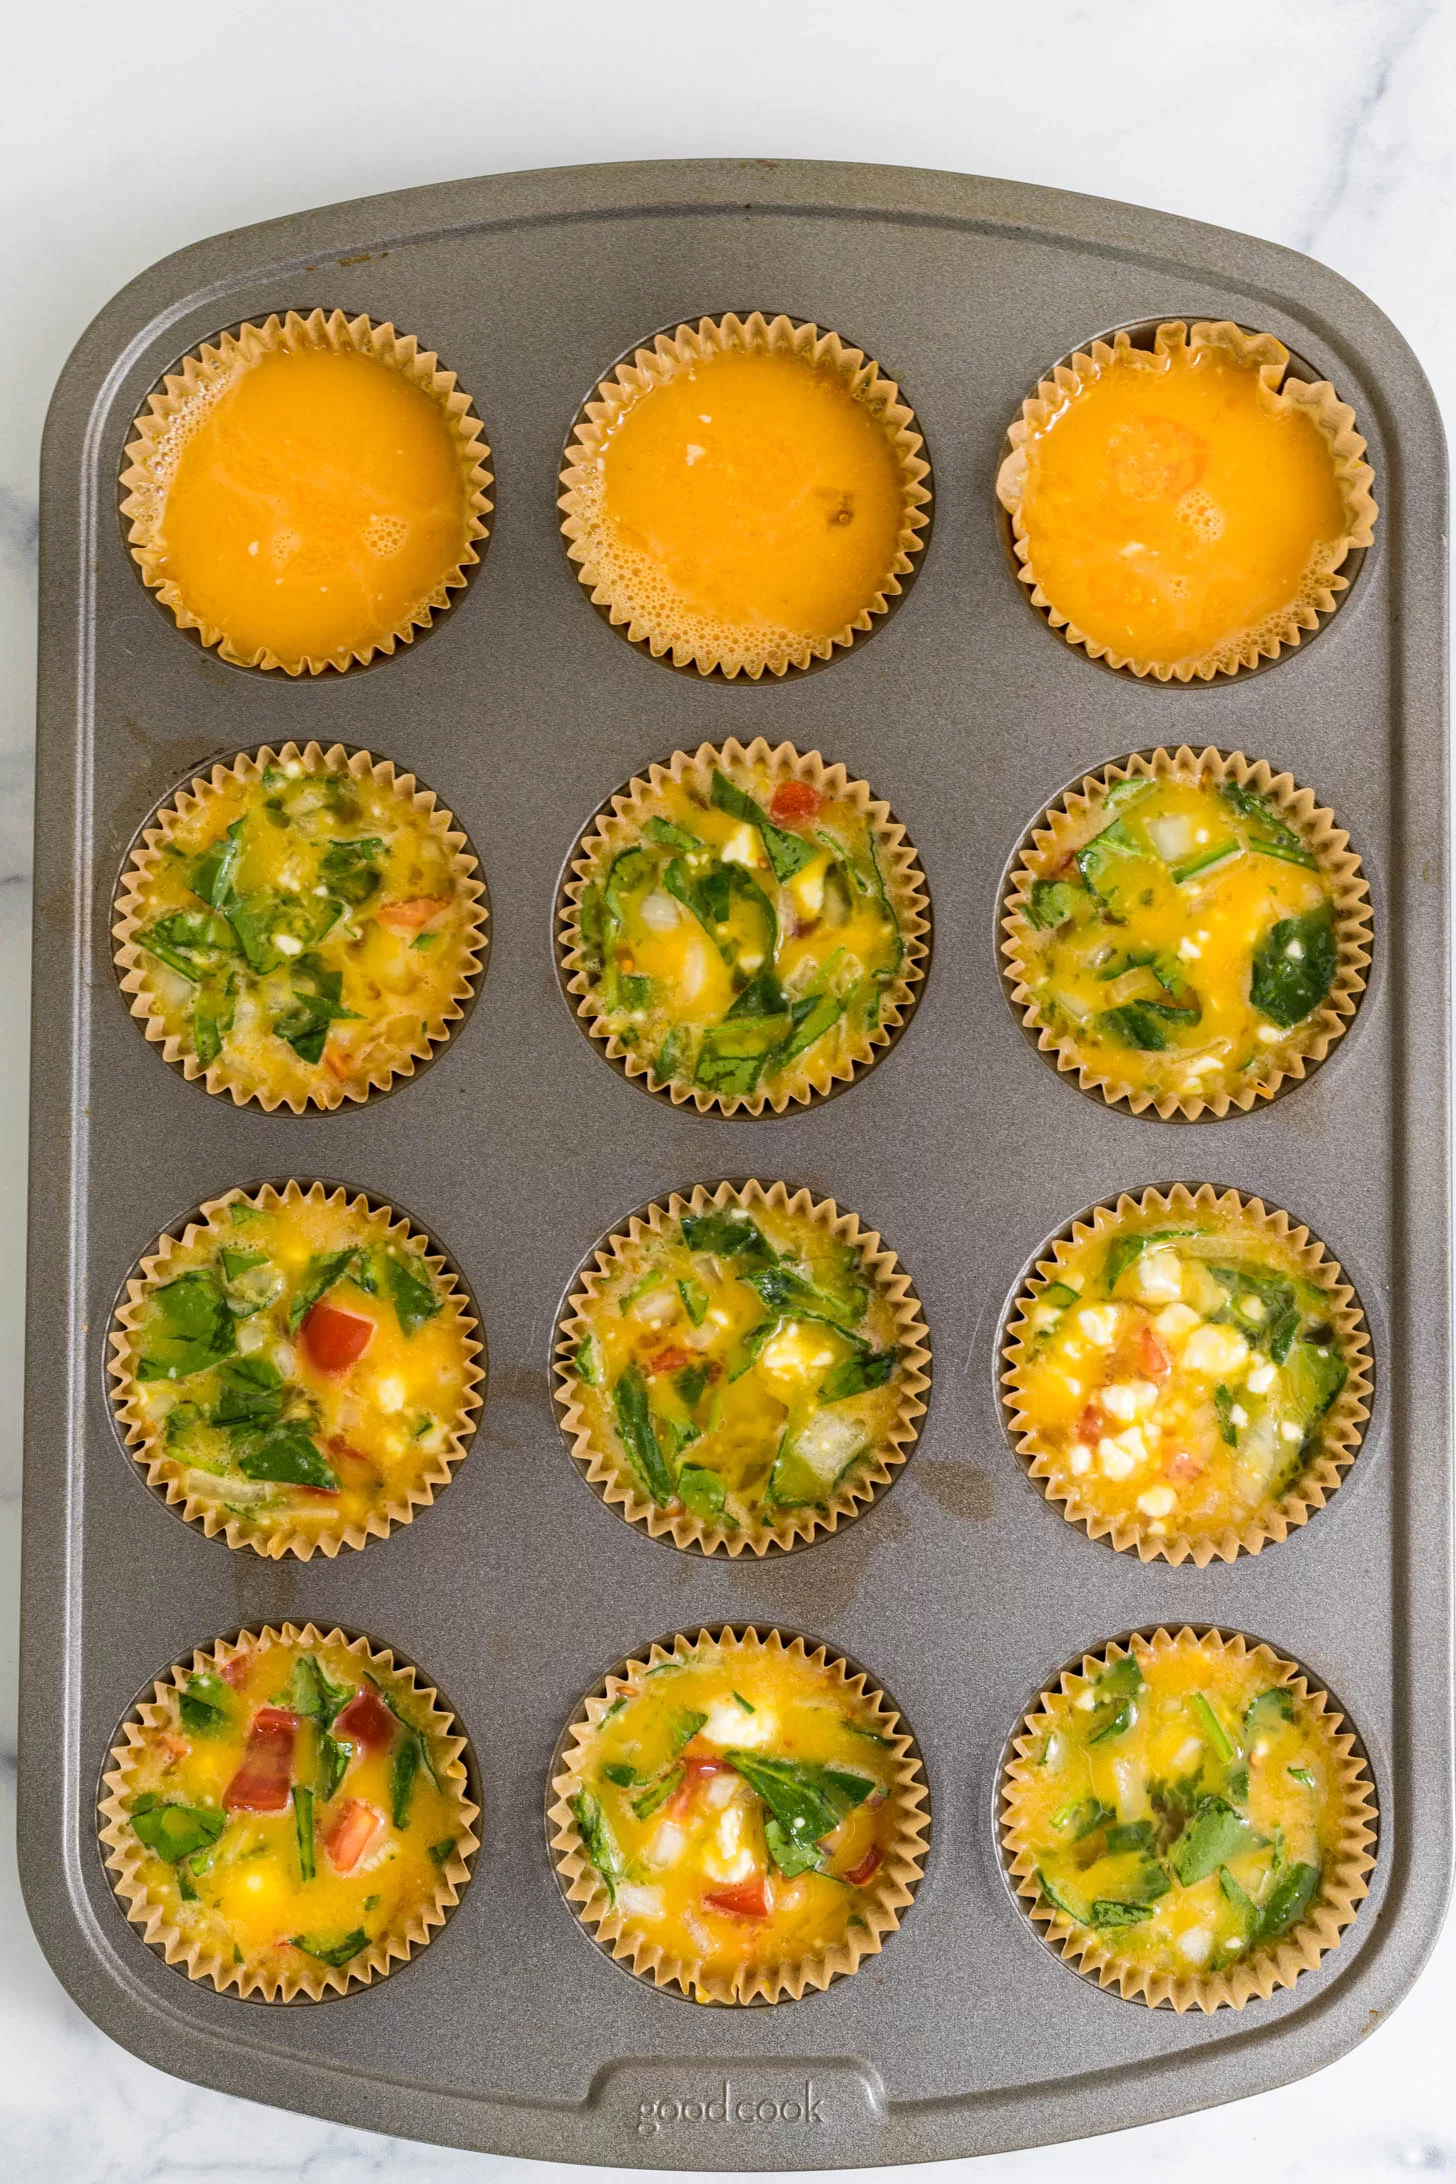 Muffin liners filled with egg mixture.